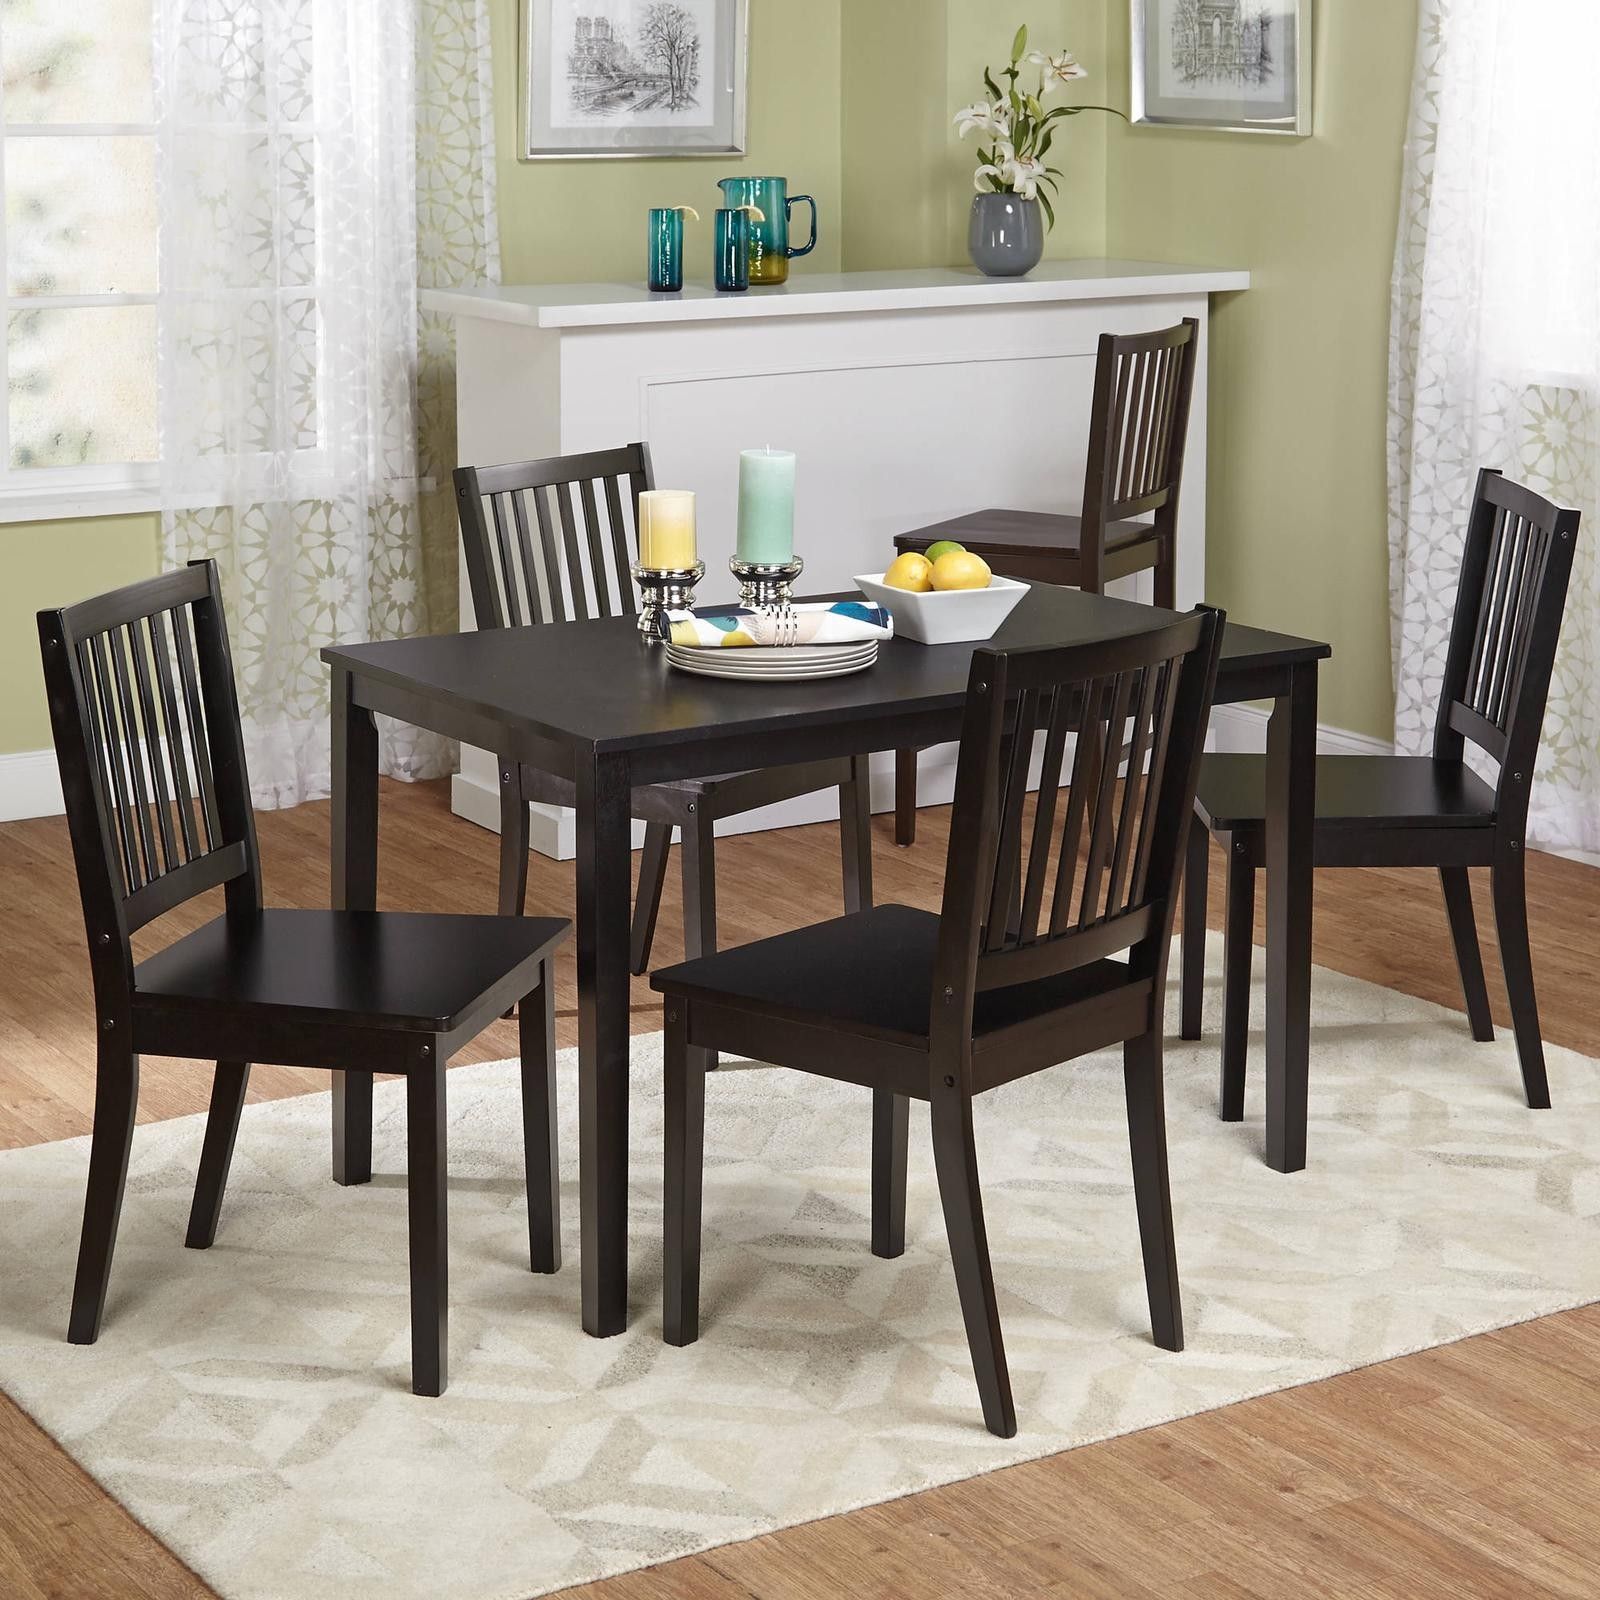 5pc dining table set solid wood new